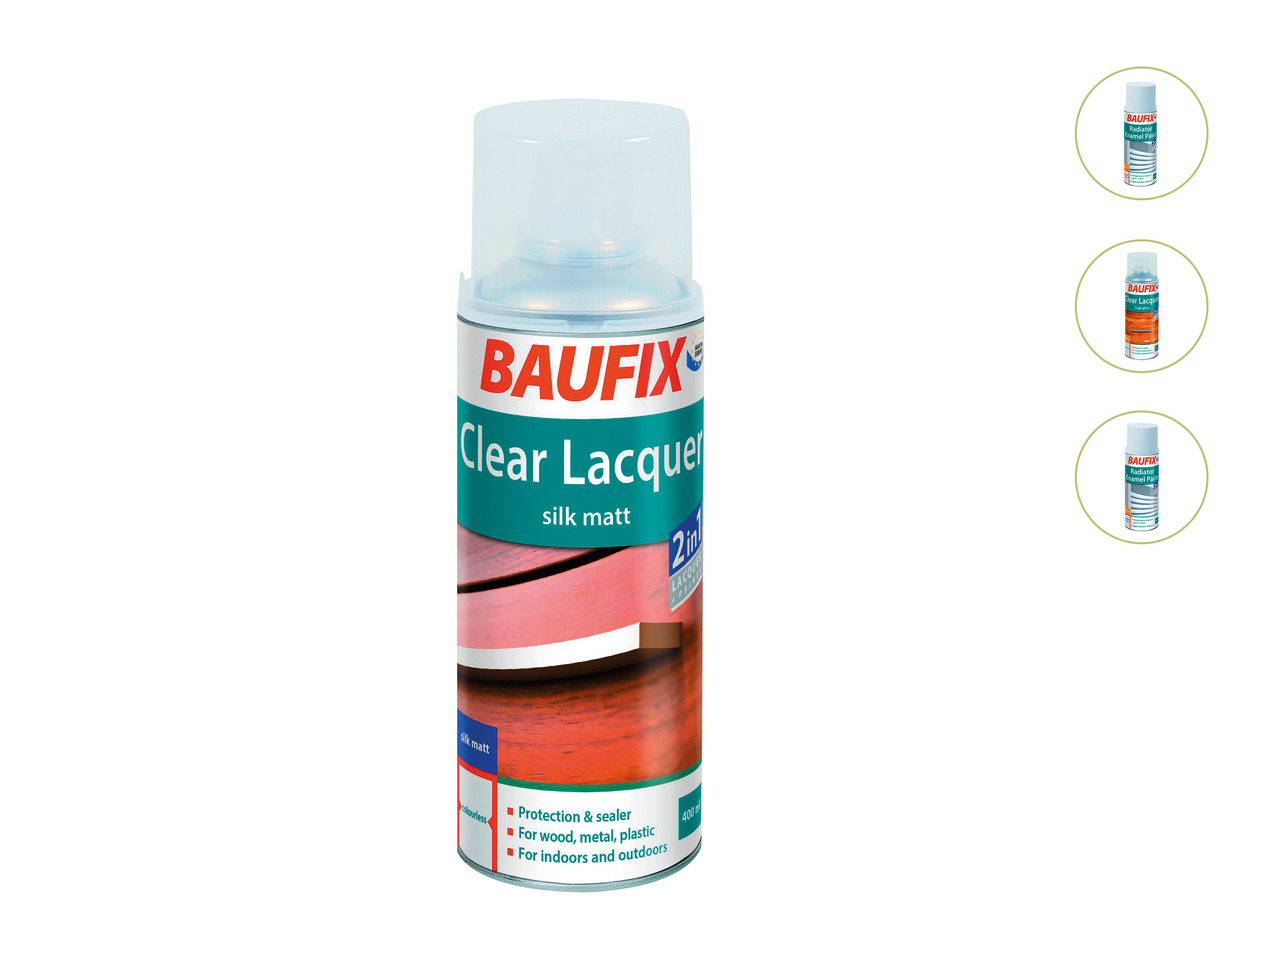 Baufix Clear Lacquer or Radiator Enamel Paint1